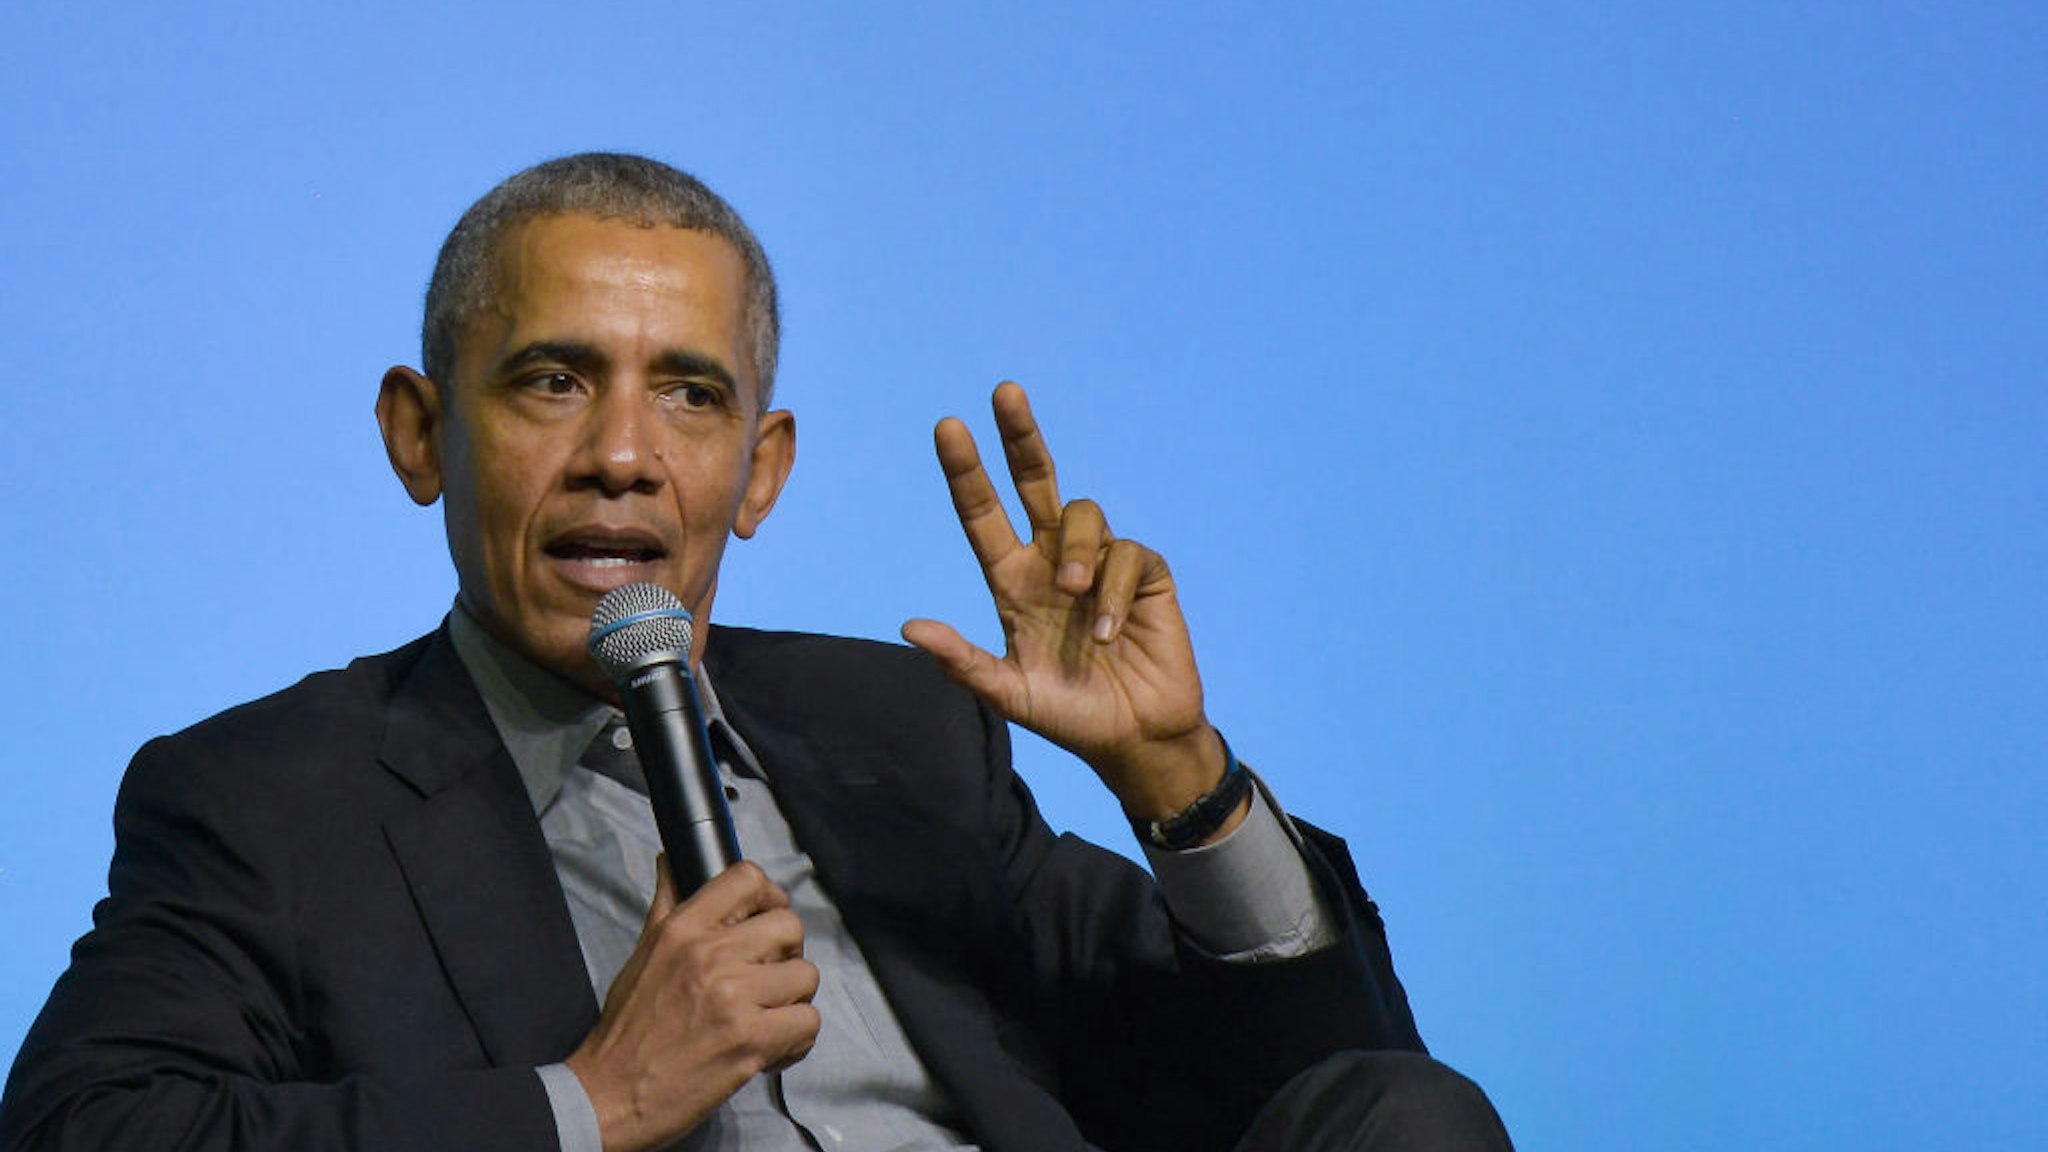 Former U.S. President Barack Obama speaks on the stage as he attends an Obama Foundation event in Kuala Lumpur, Malaysia, 13 December 2019. Obama and his wife Michelle are in Kuala Lumpur for the inaugural Leaders: Asia-Pacific conference, focused on promoting women's education in the region.